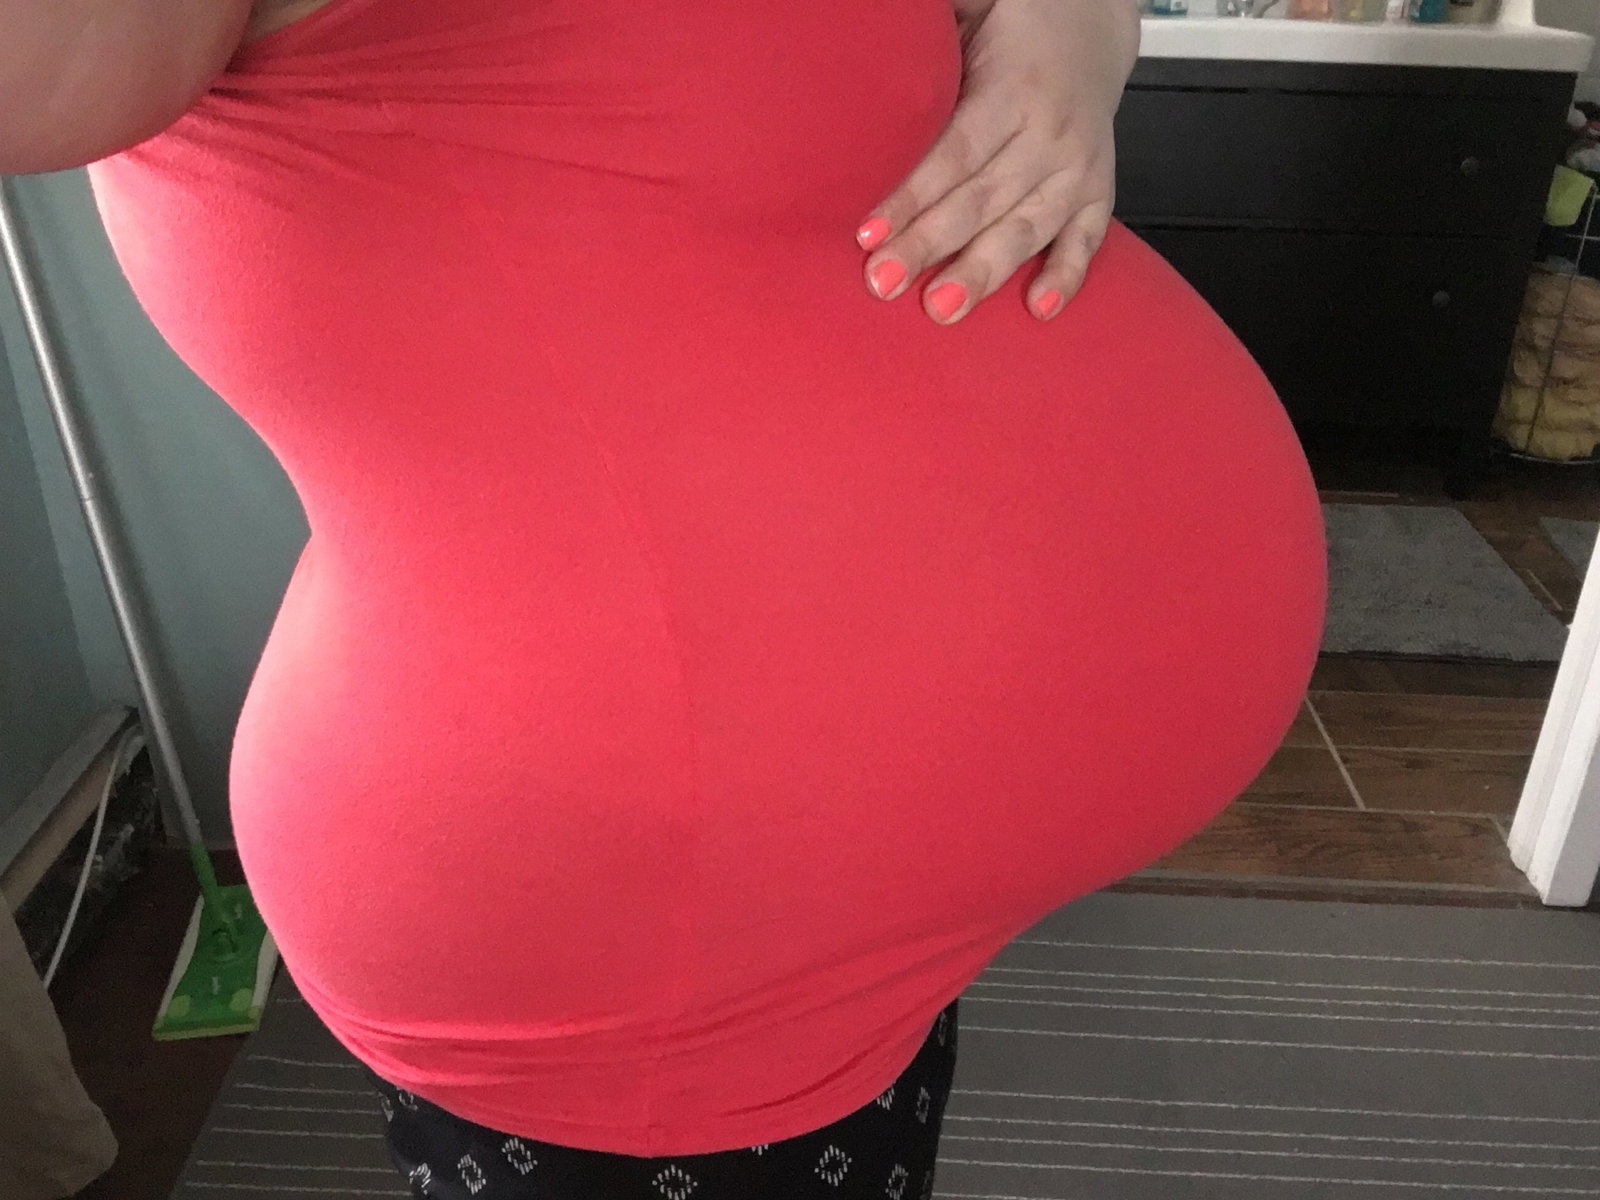 Photo by preggoalways with the username @preggoalways,  March 14, 2016 at 6:59 PM and the text says '#preggoalways  #afternoonbump  #big  #pregnant  #belly  #pregnancy  #fetish  #pregnant  #preggo  #pregnancy  #pregnancy  #blog  #pregnancy  #glow  #fertile  #hucow  #hucow  #life  #big  #belly  #big  #tits  #big  #boobs  #huge  #belly  #huge  #baby  #bump..'